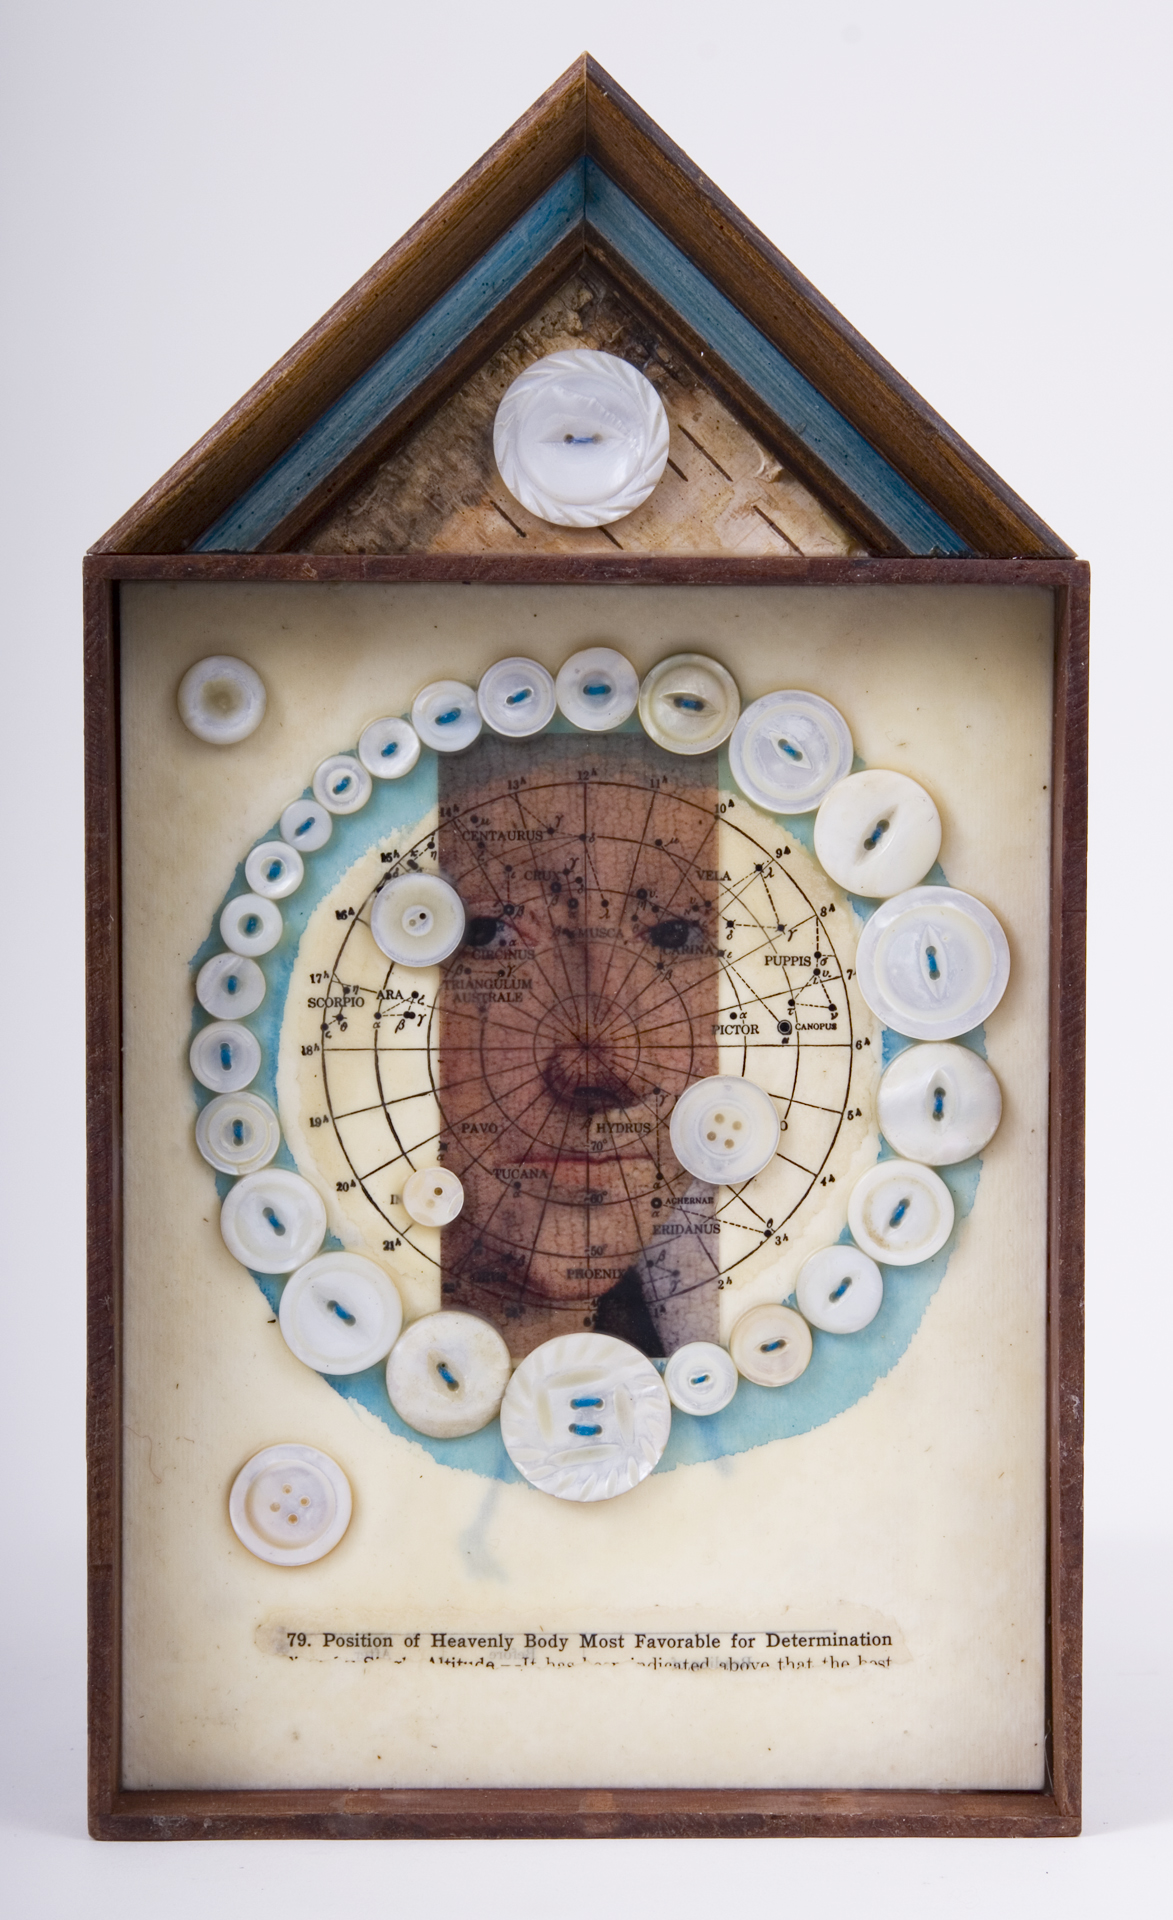 \"79. Position of Heavenly Body Most Favorable for Determination\"
mixed-media assemblage
12.25 x 7 x
2009
$85.00
 Cigar box, frame sample, birch bark, mother of pearl buttons, transparency, ink, wax, astronomy text on watercolor paper